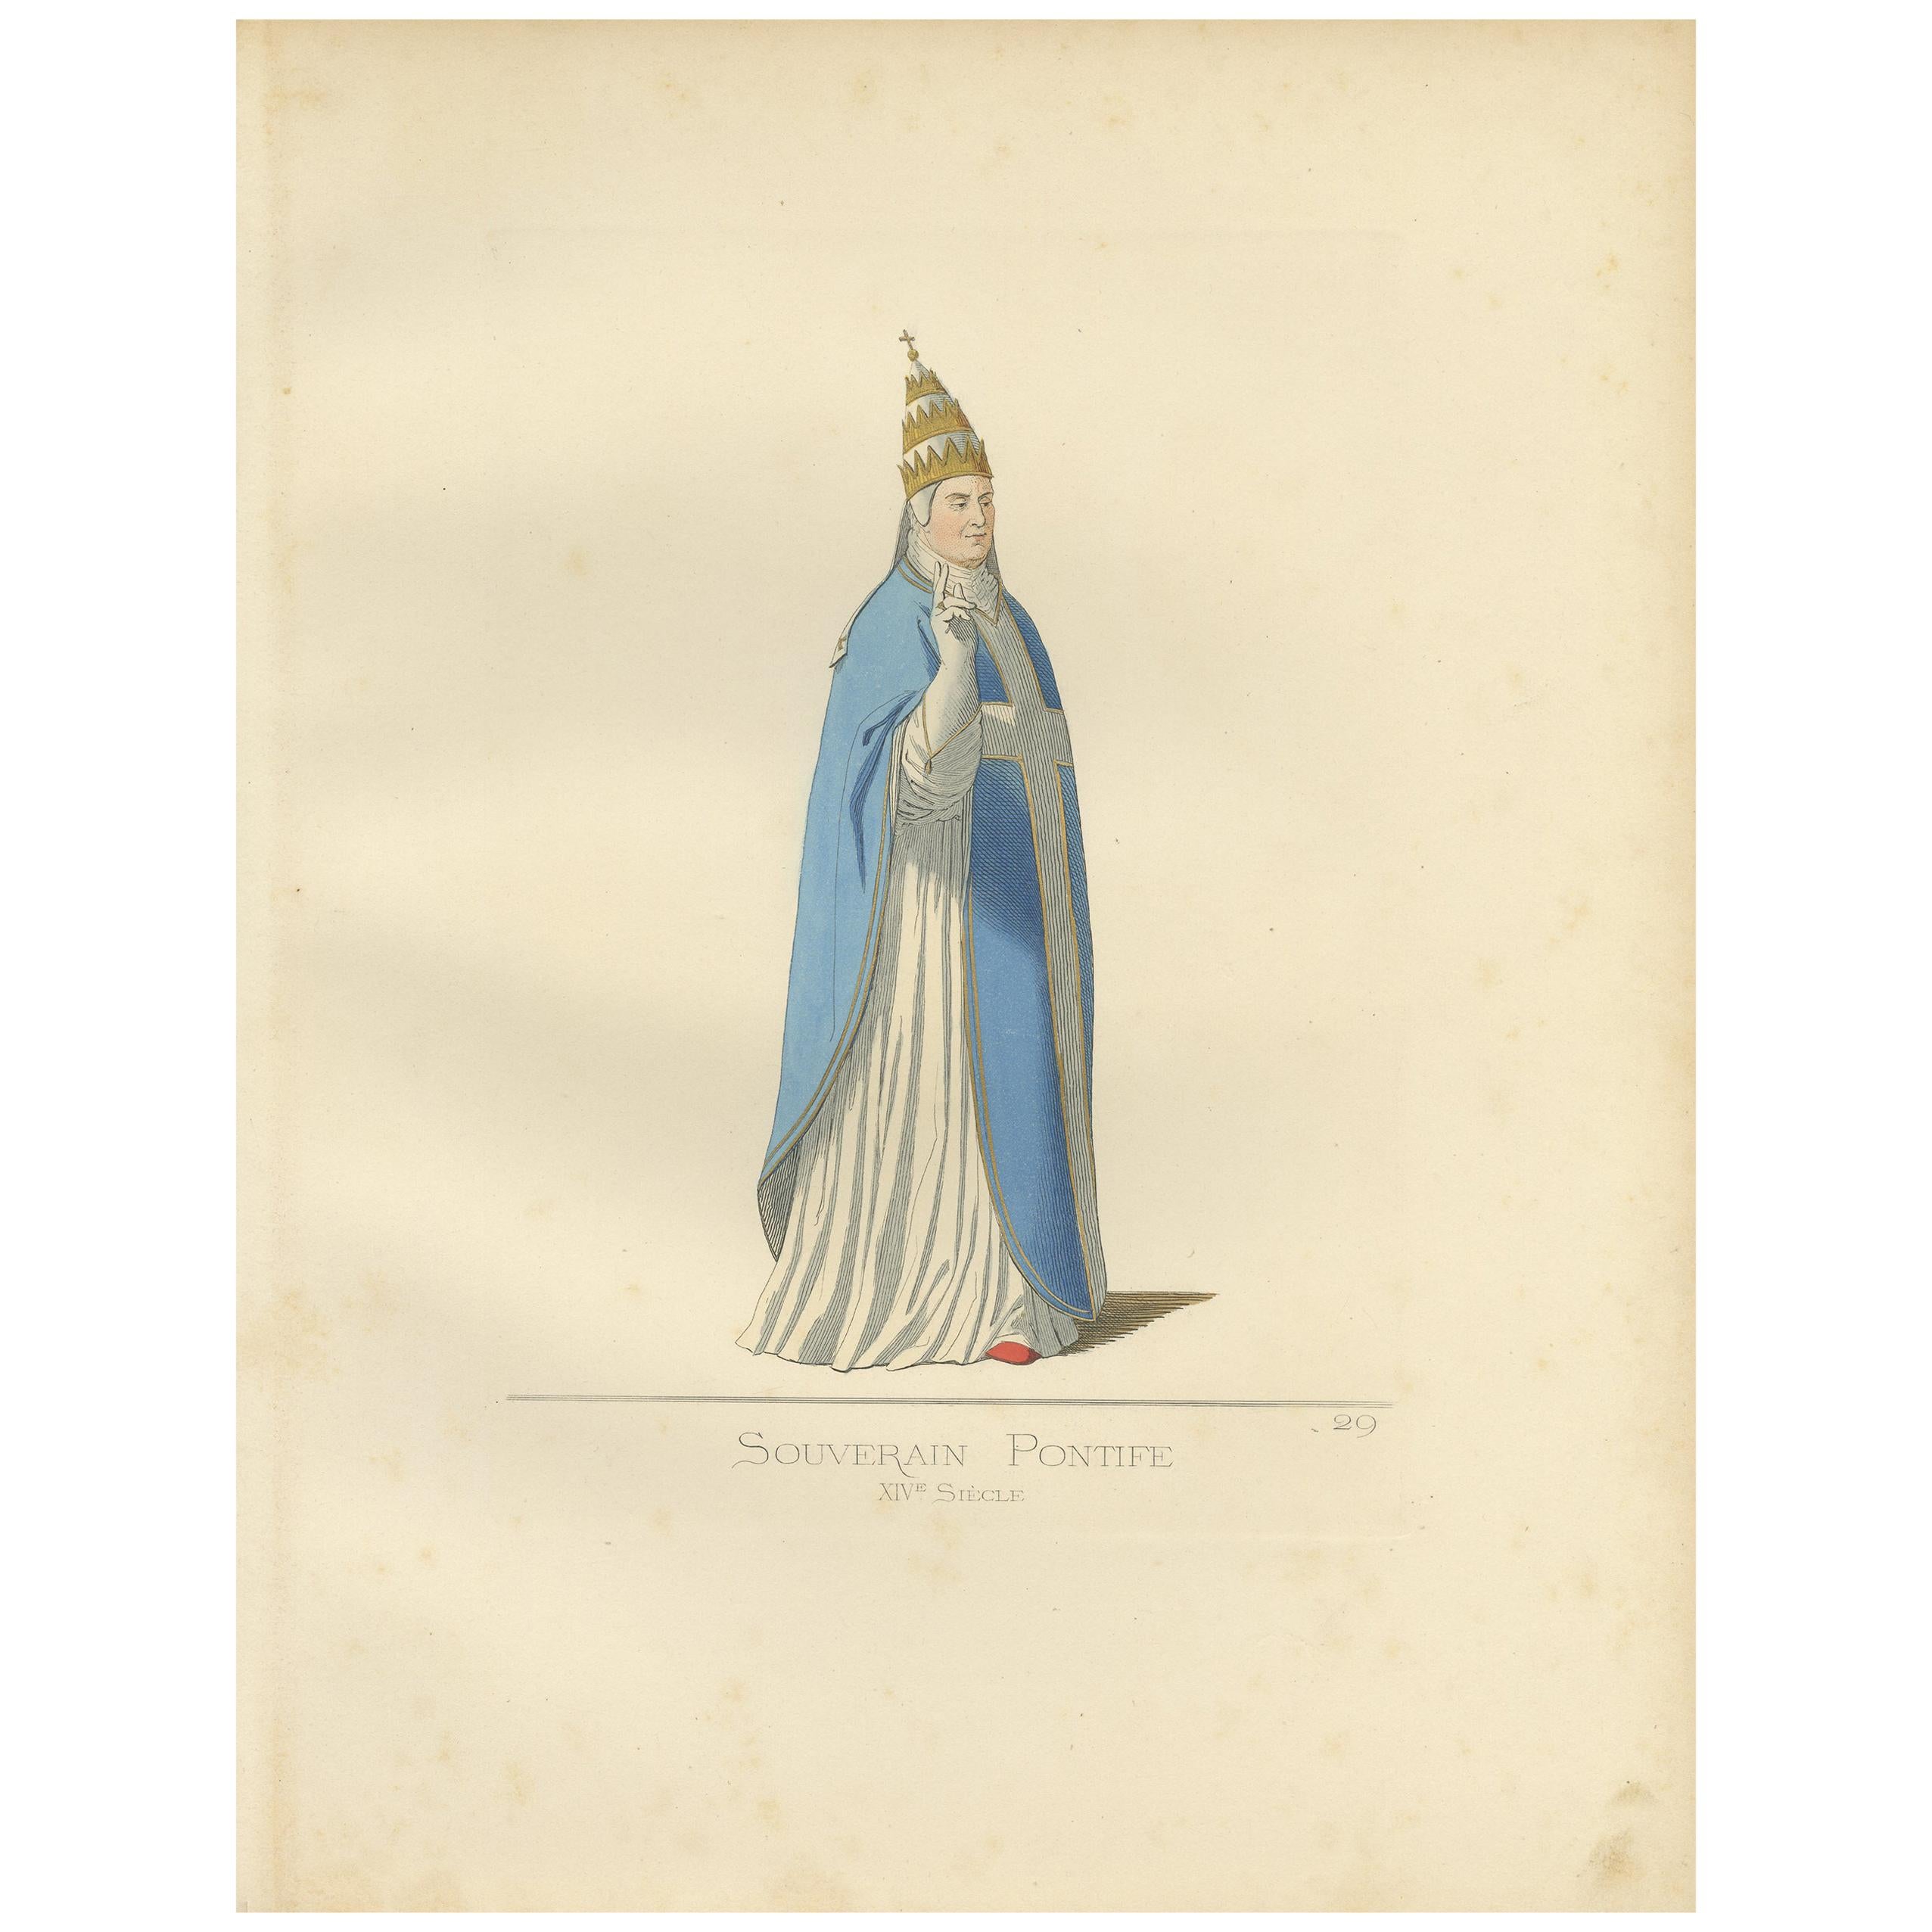 Antique Print of a Sovereign Pope by Bonnard, '1860'